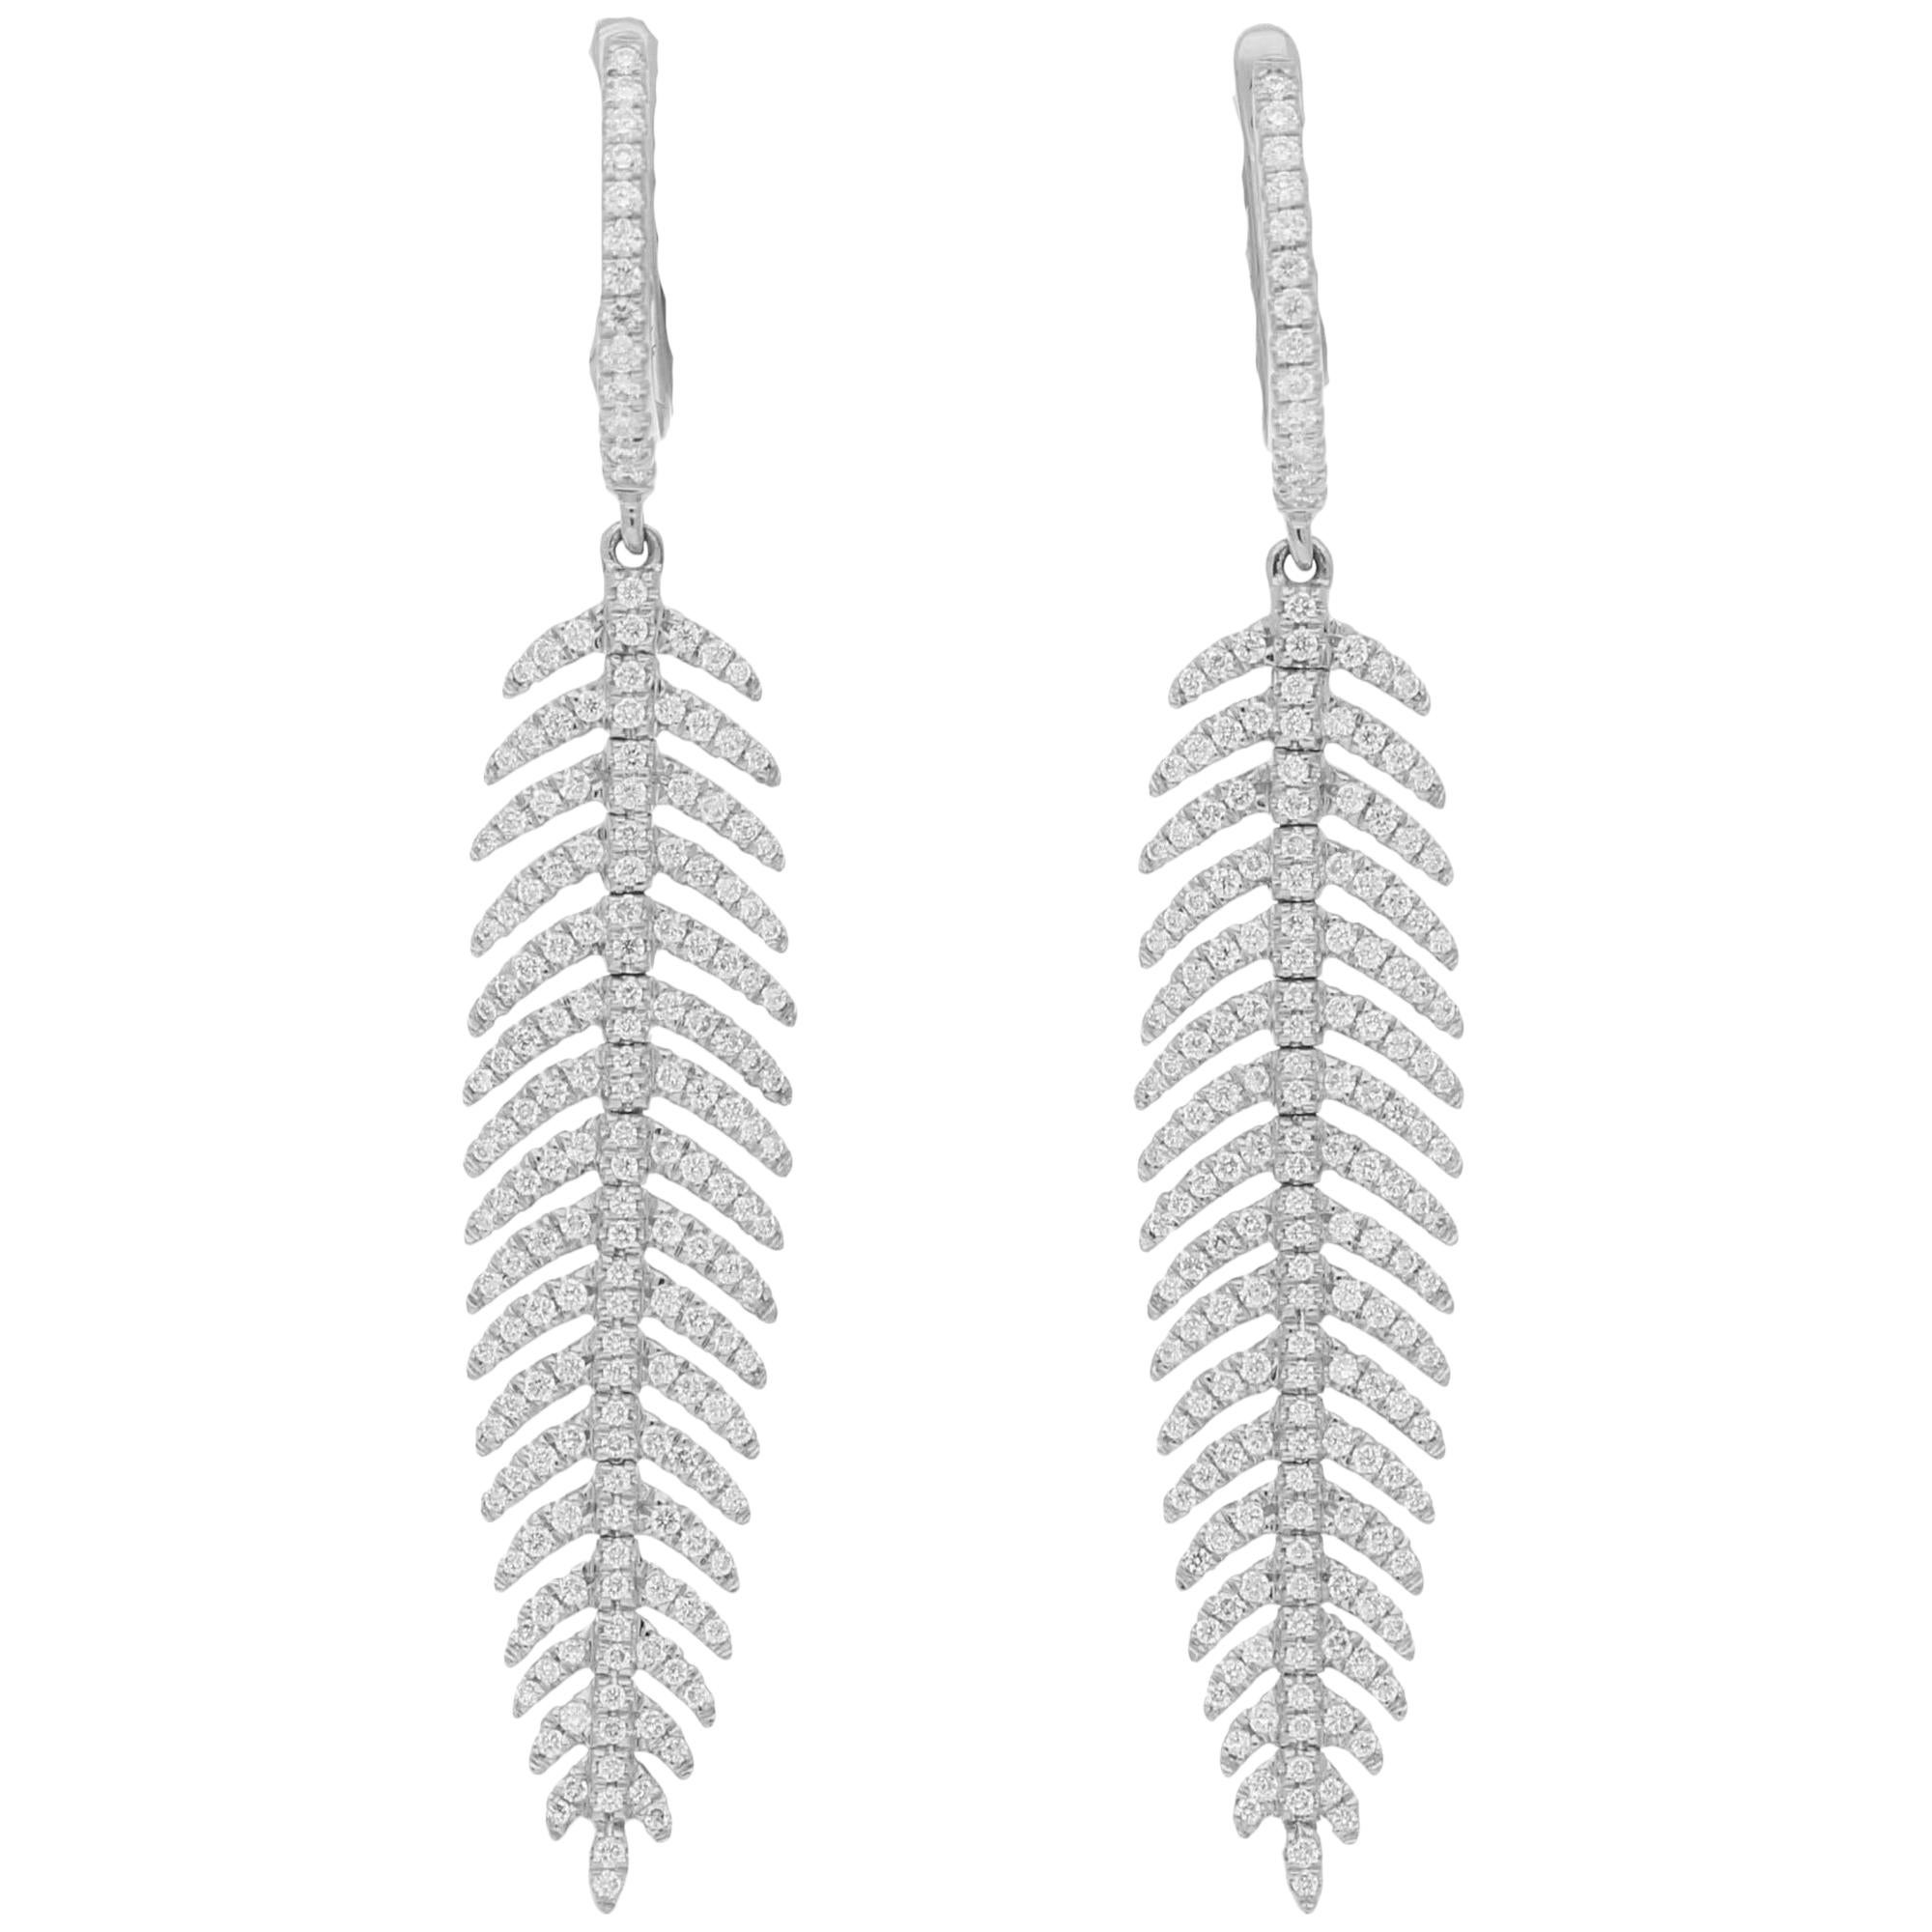 Articulated Diamond Drop Feather Earrings in 18 Karat White Gold